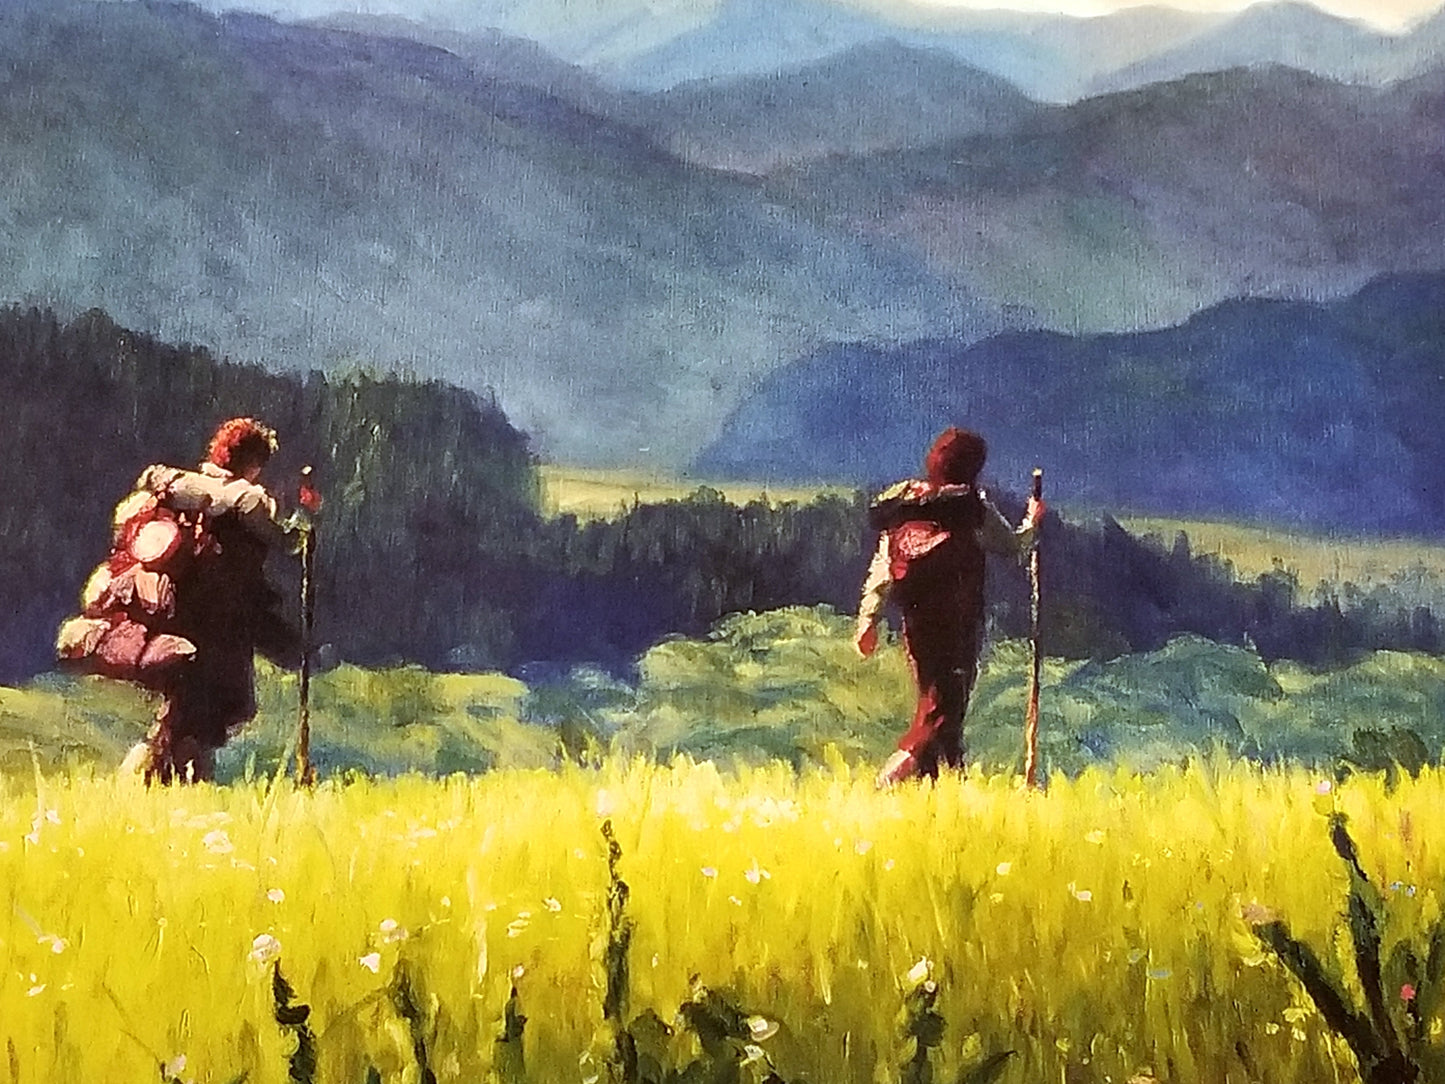 Frodo and Sam's Journey Lord of the Rings Art Print